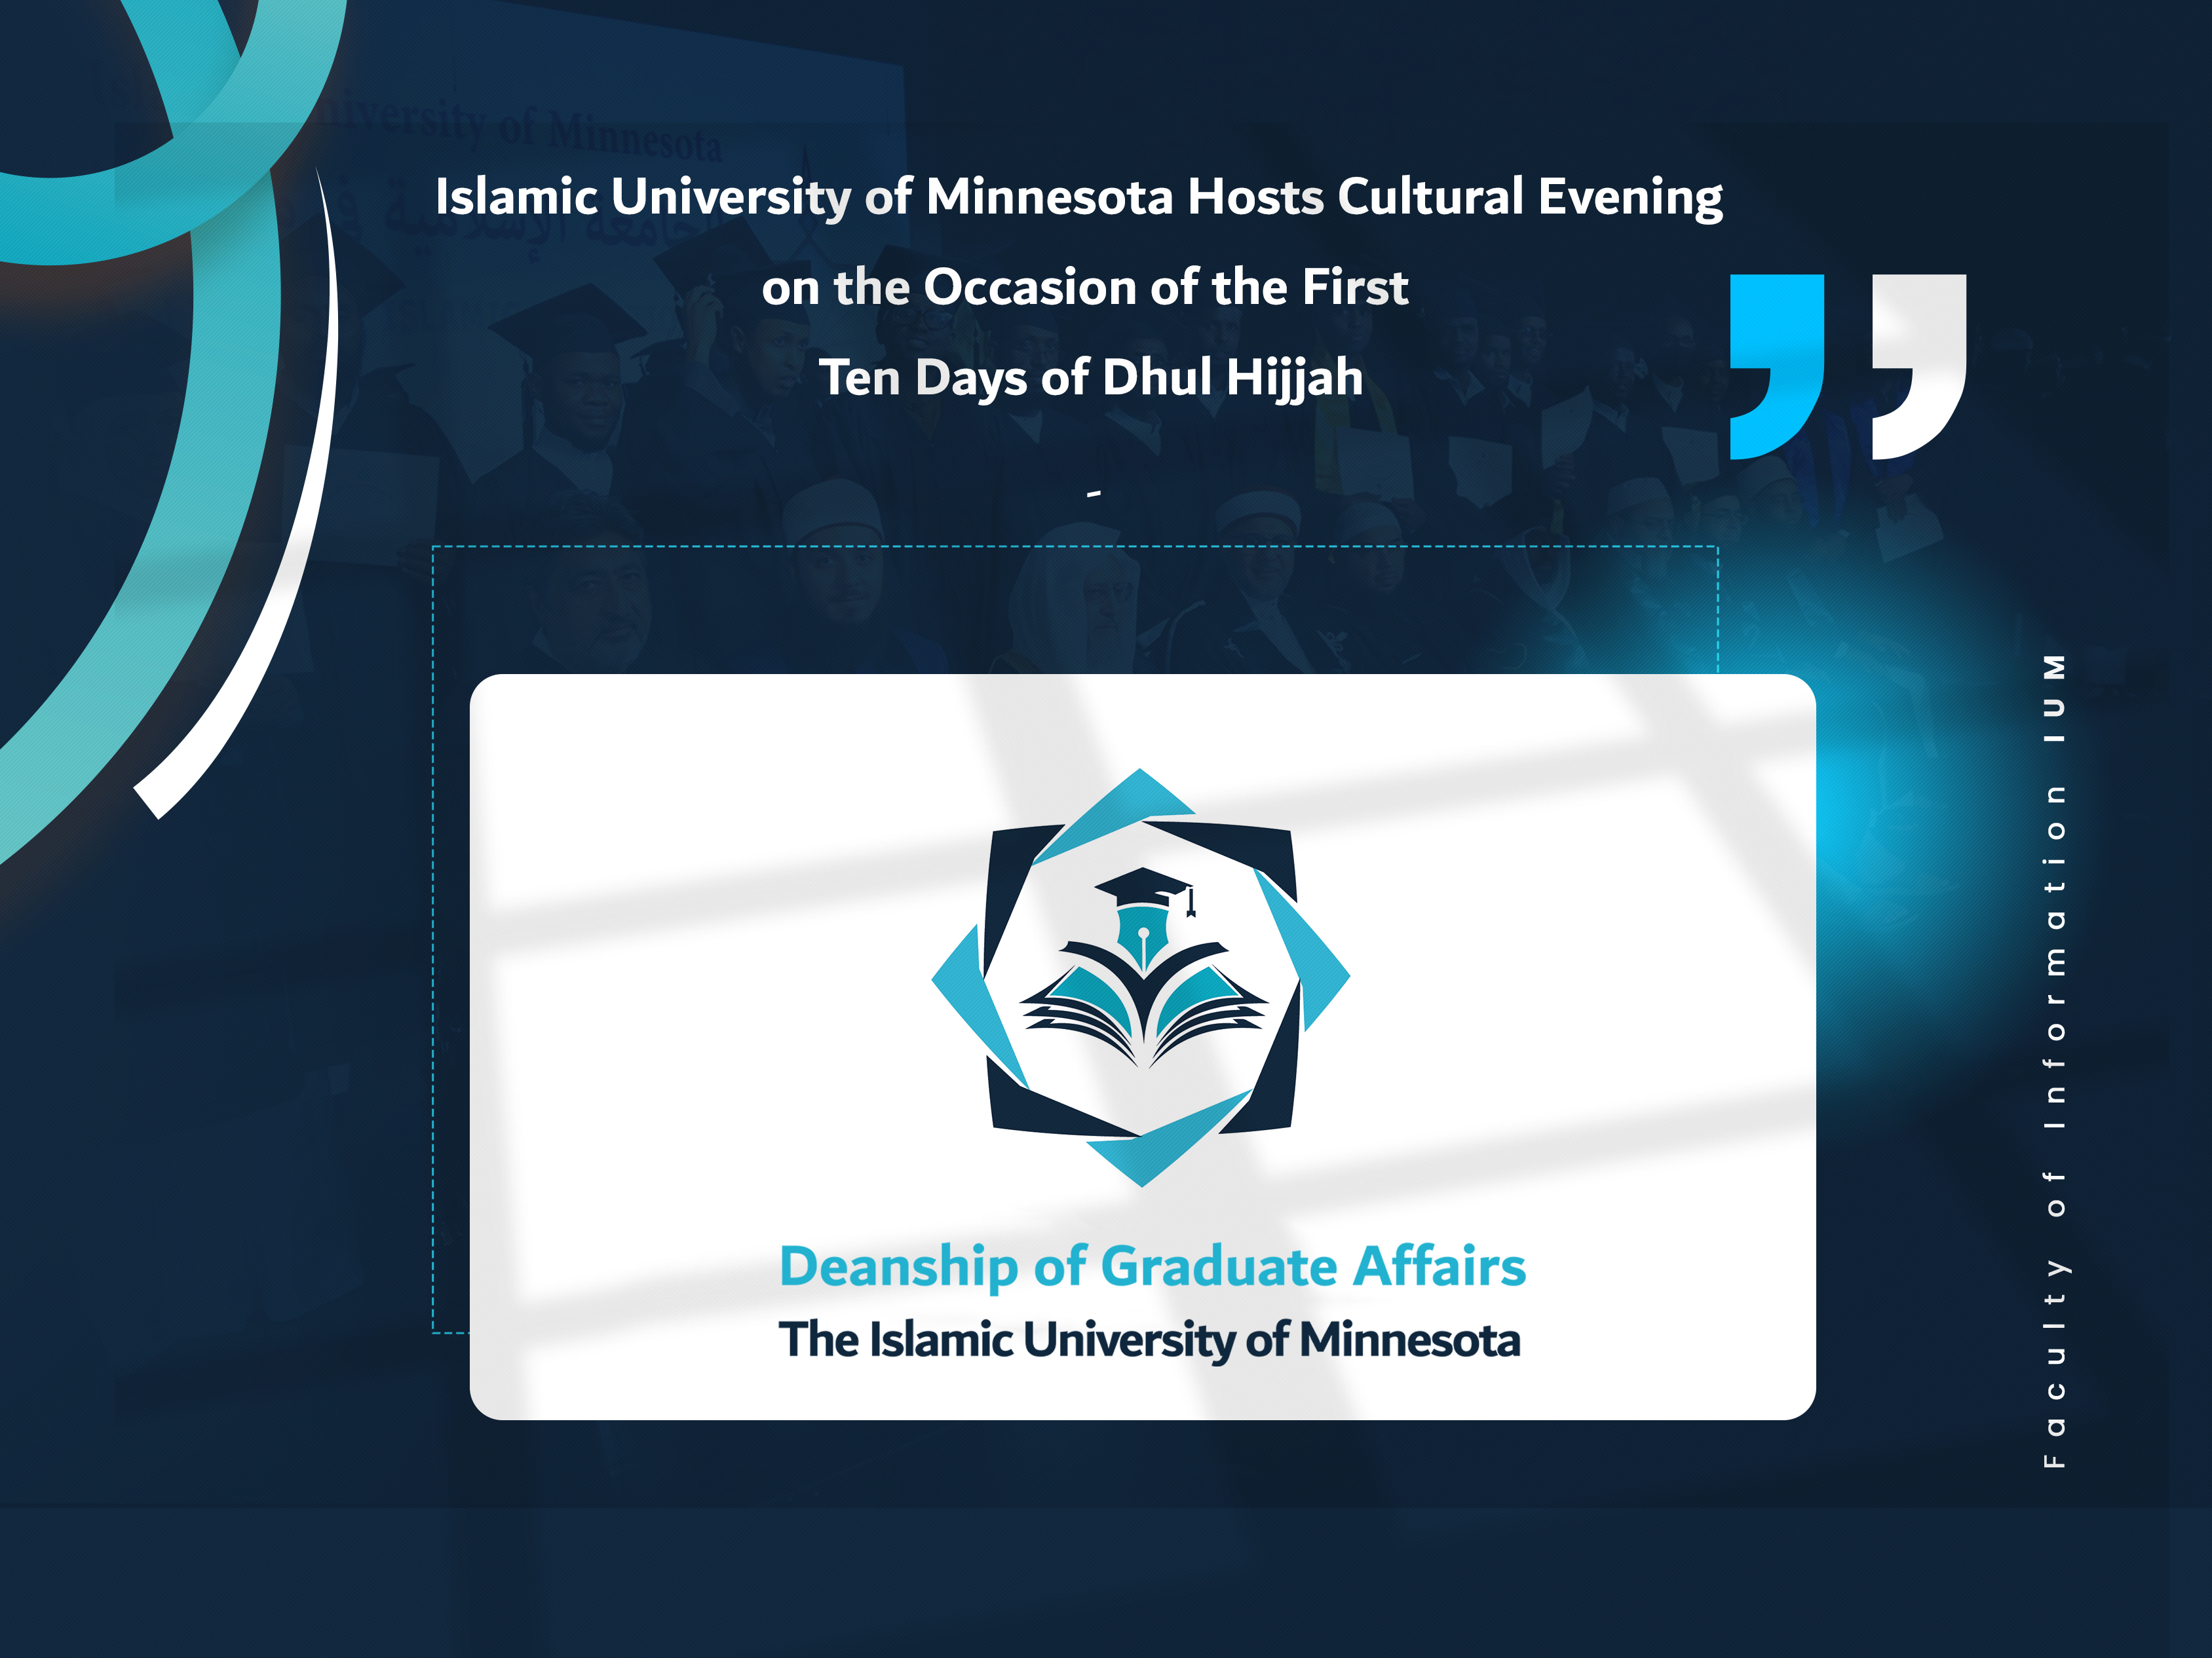 Islamic University of Minnesota Hosts Cultural Evening on the Occasion of the First Ten Days of Dhul Hijjah